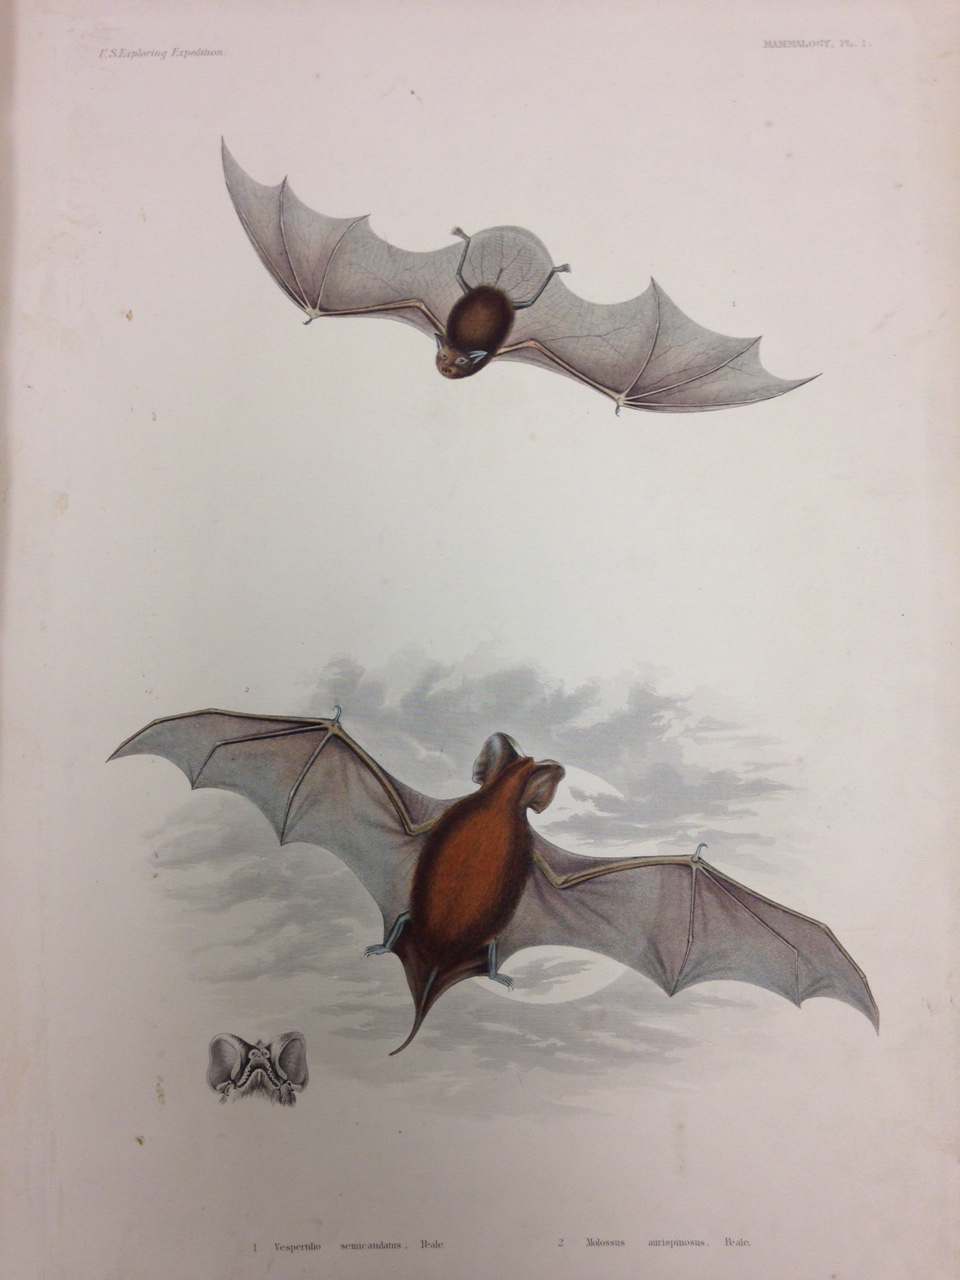 Mammalogy, Plate 1: Vespertilio semicaudatus (also known as Emballonura semicaudata semicaudata, Pacific sheath-tailed bat). – This little bat likes caves, but there appears to be no information about what they like to eat… mwahahahahaaa! 